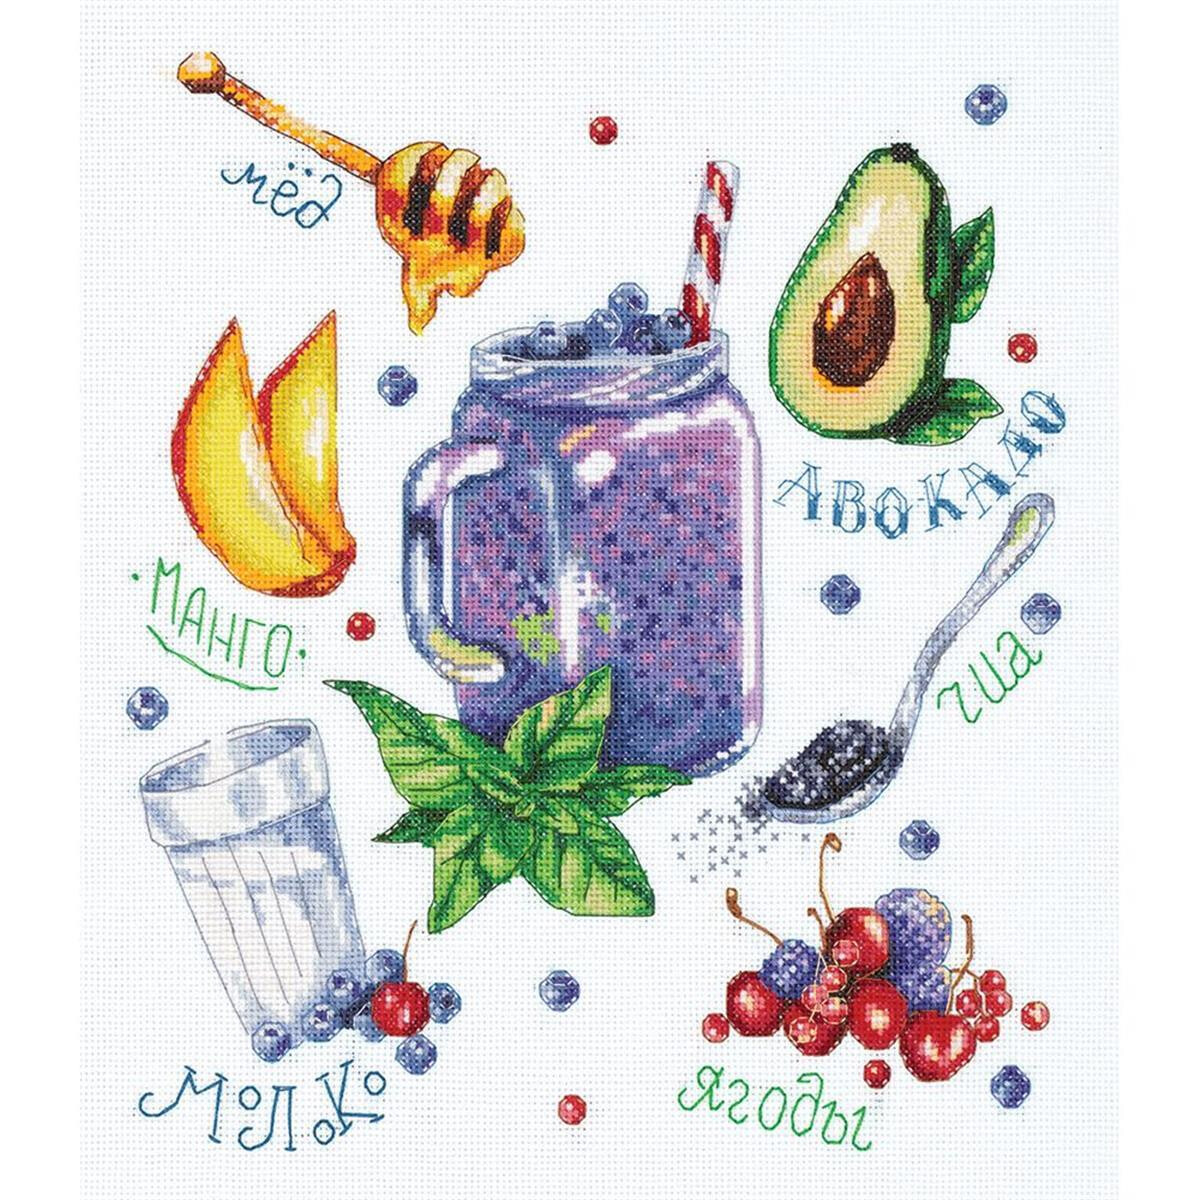 Panna counted cross stitch kit "Berry Smoothie"...